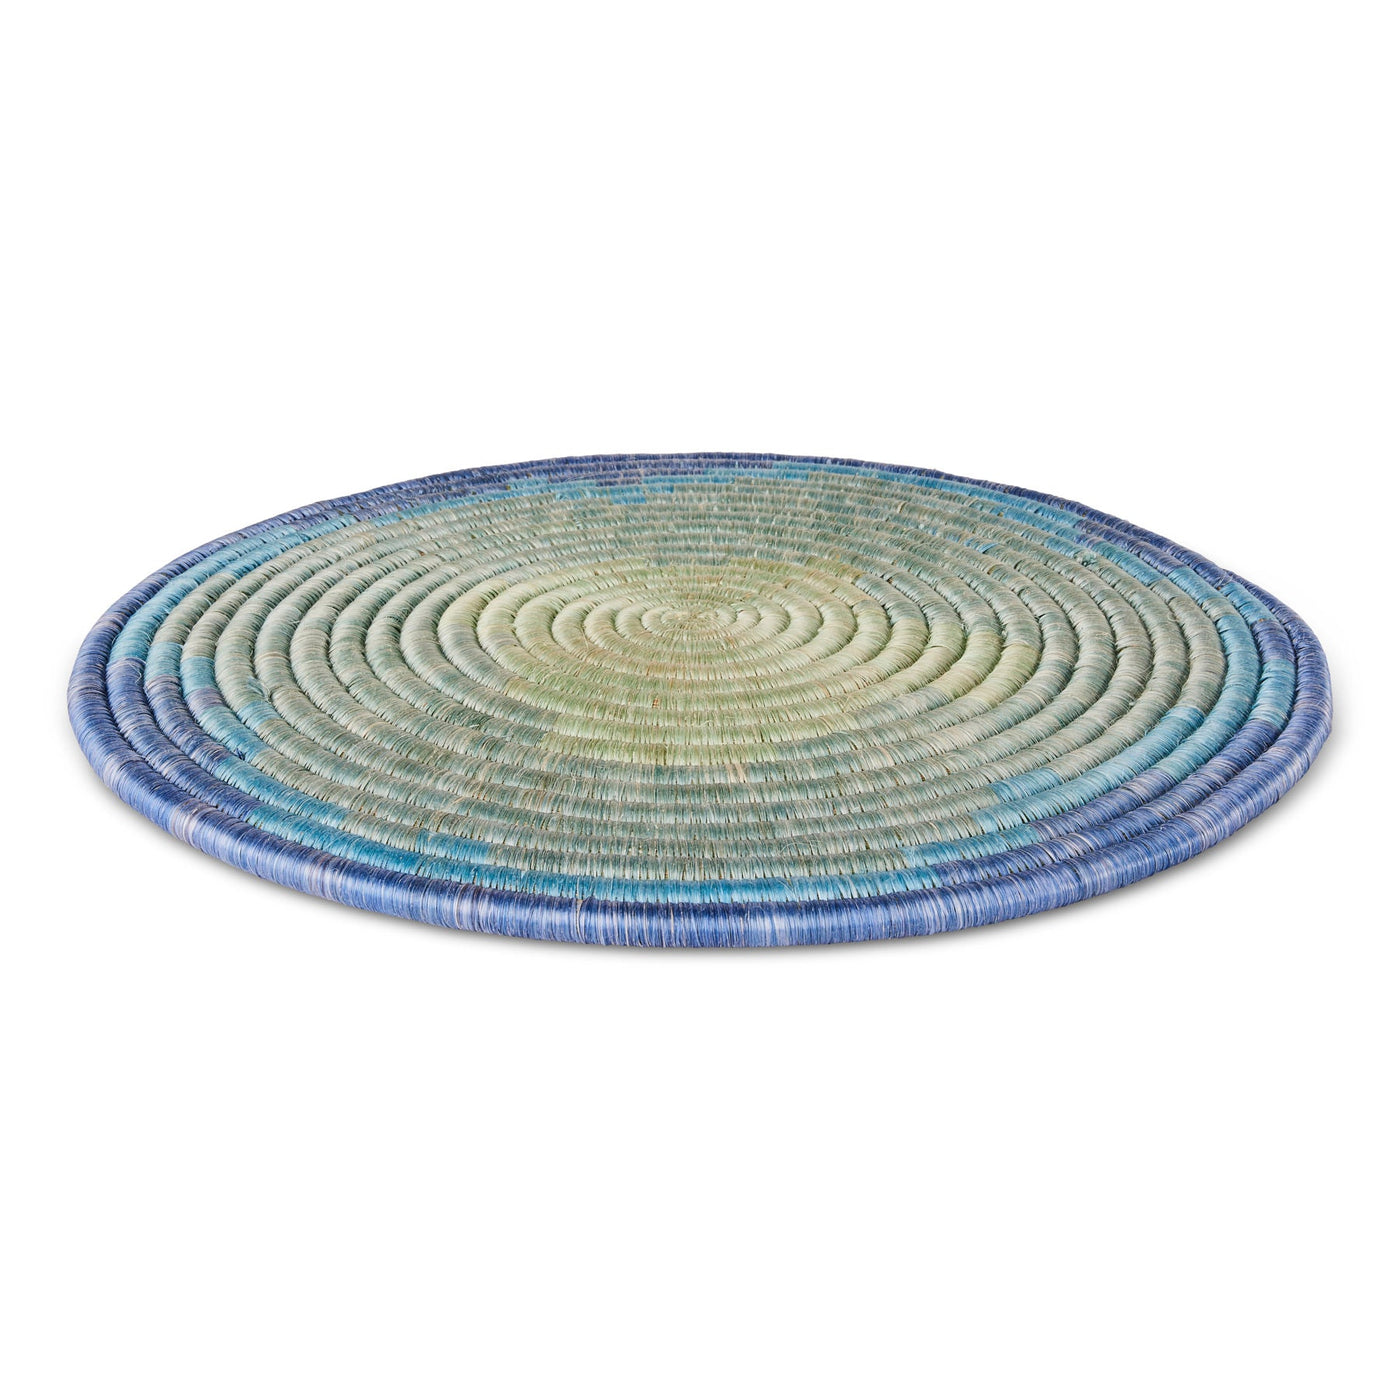 14" Disc - Ambient Blue-Greens